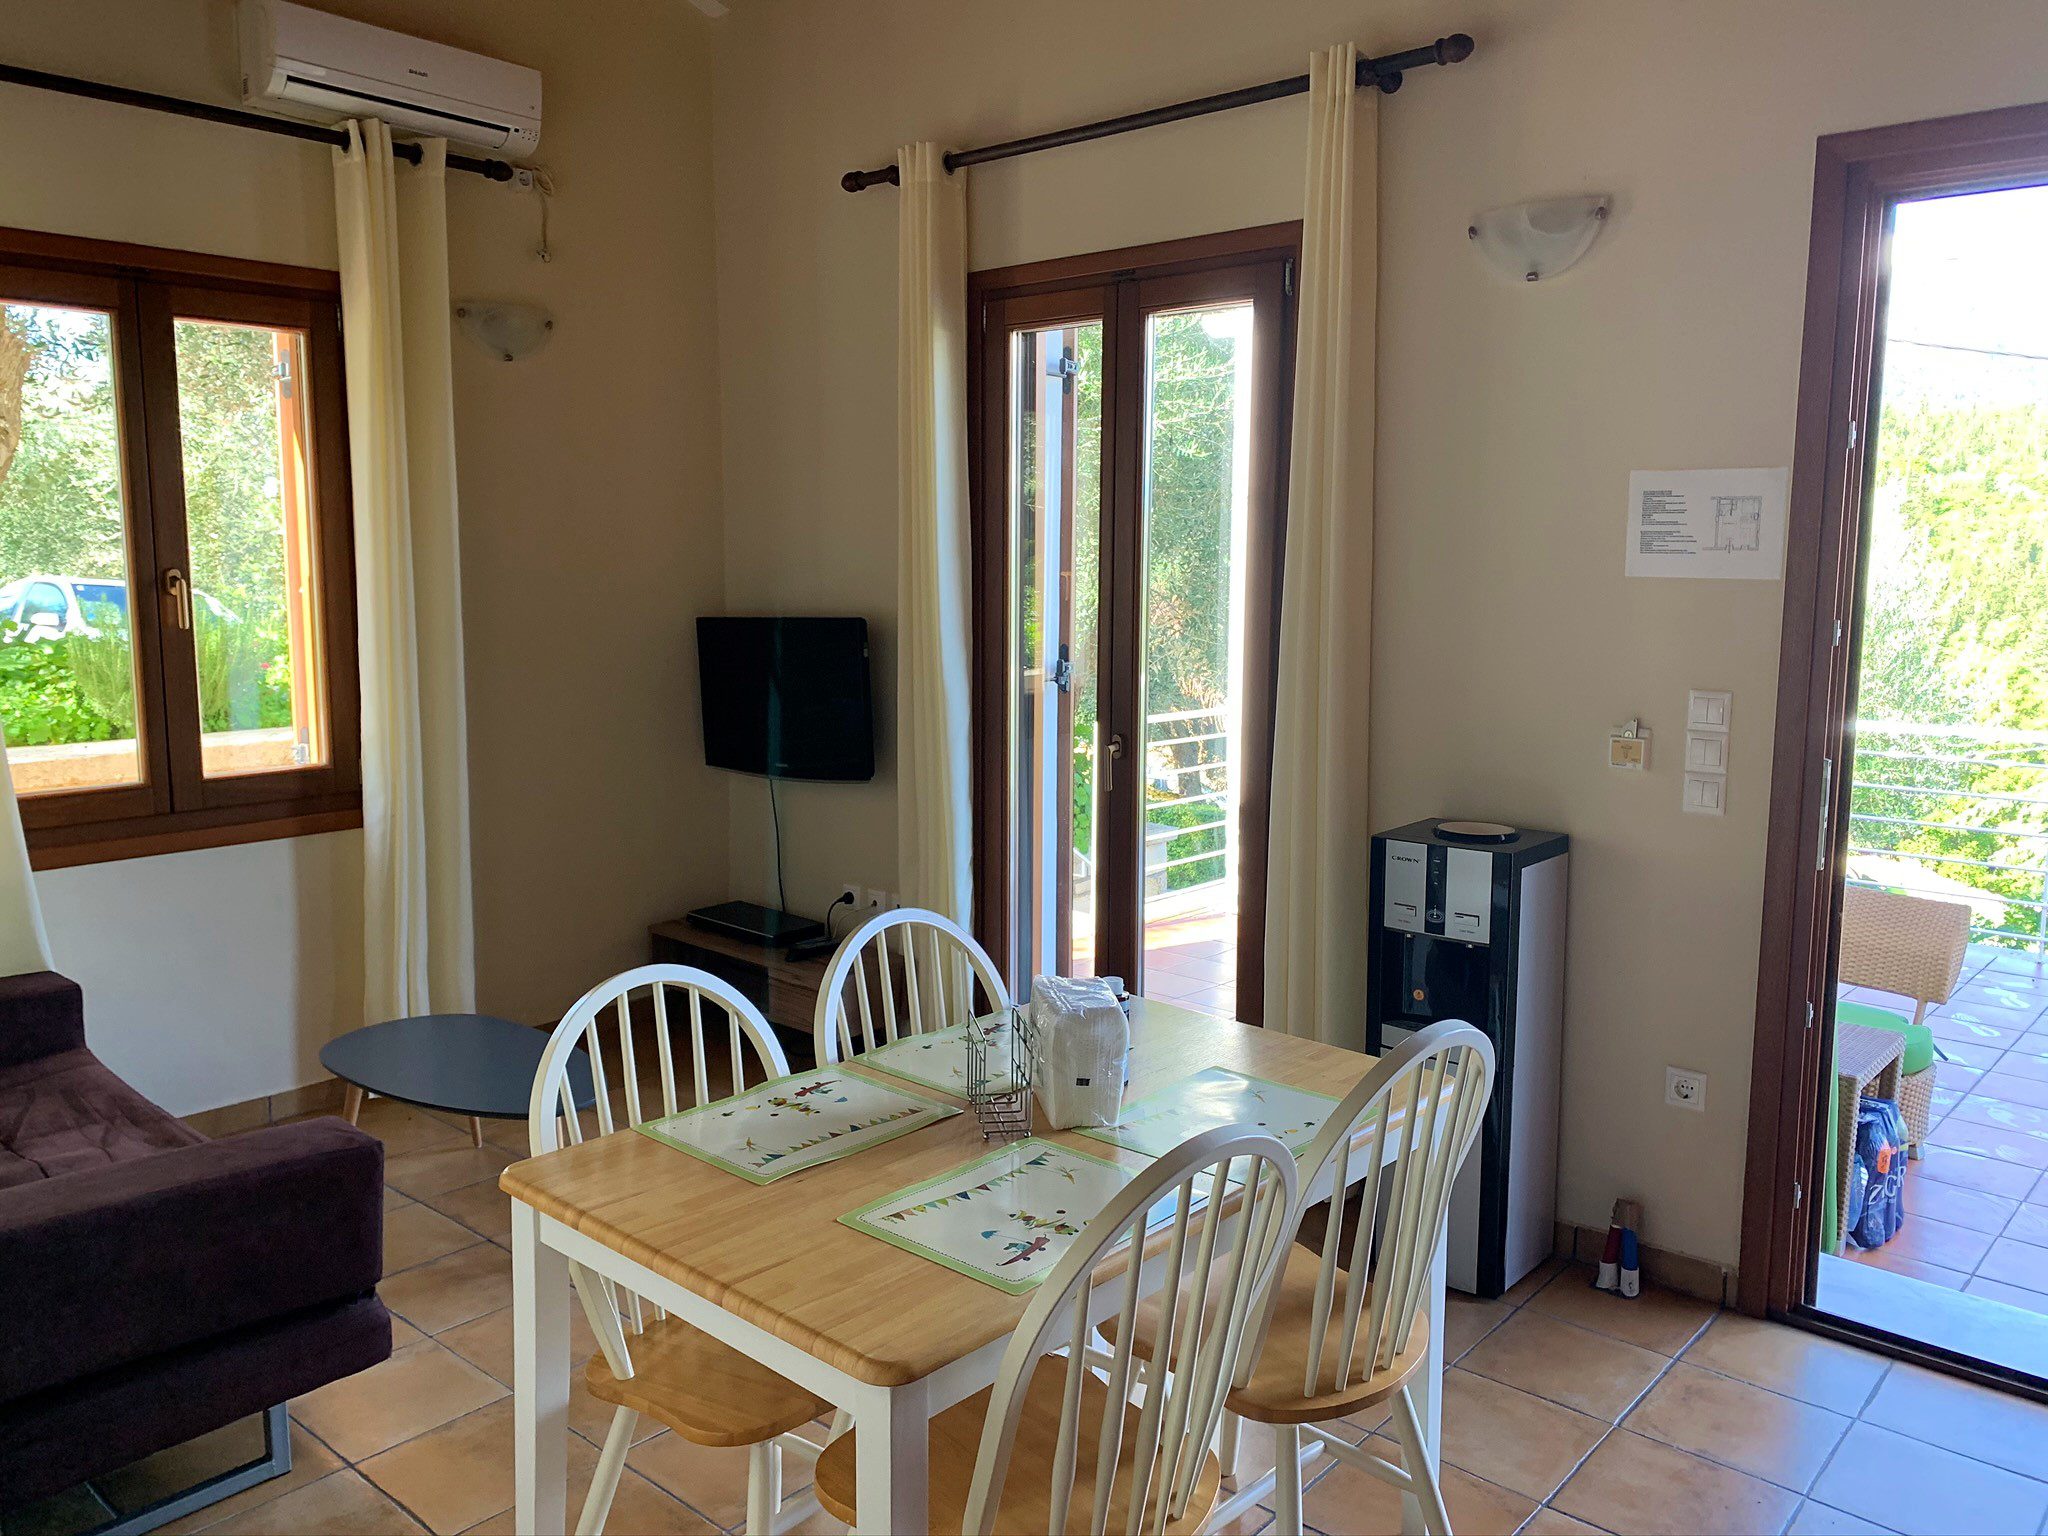 Interior livingroom of holiday house for rent in Ithaca Greece, Frikes